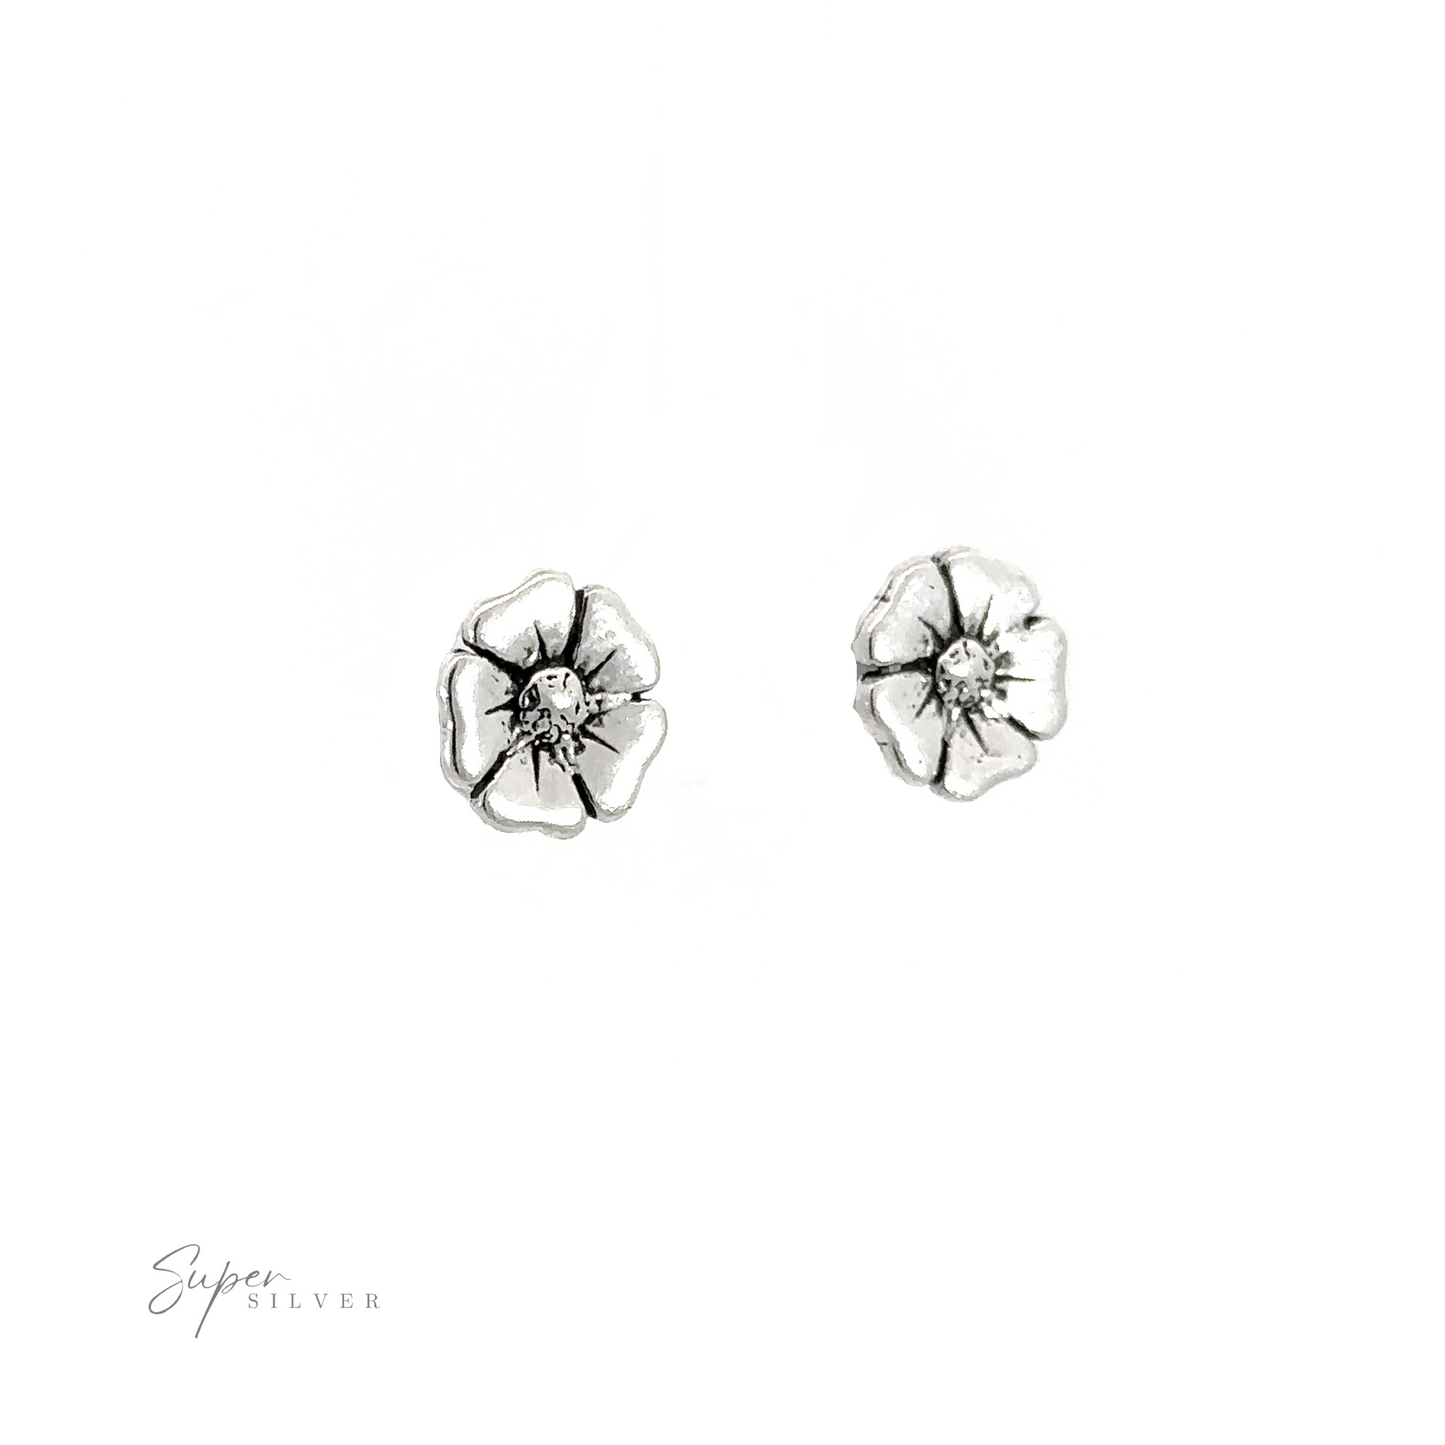 A pair of adorable silver Poppy Flower Studs on a white background.